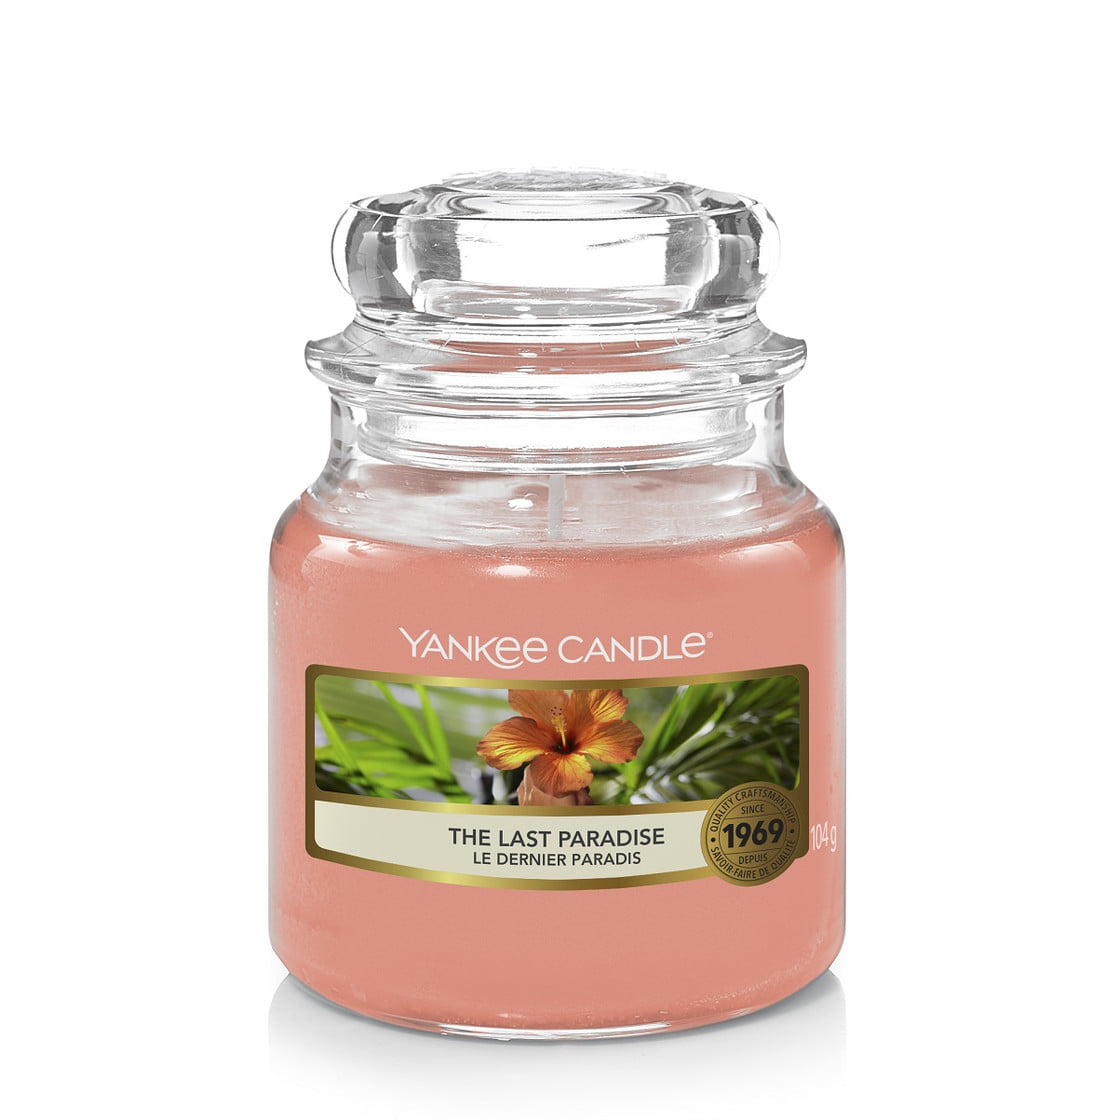 http://www.paggicasalinghi.it/wp-content/uploads/2020/12/yankee_candle_giara_piccola_the_last_paradise.jpg